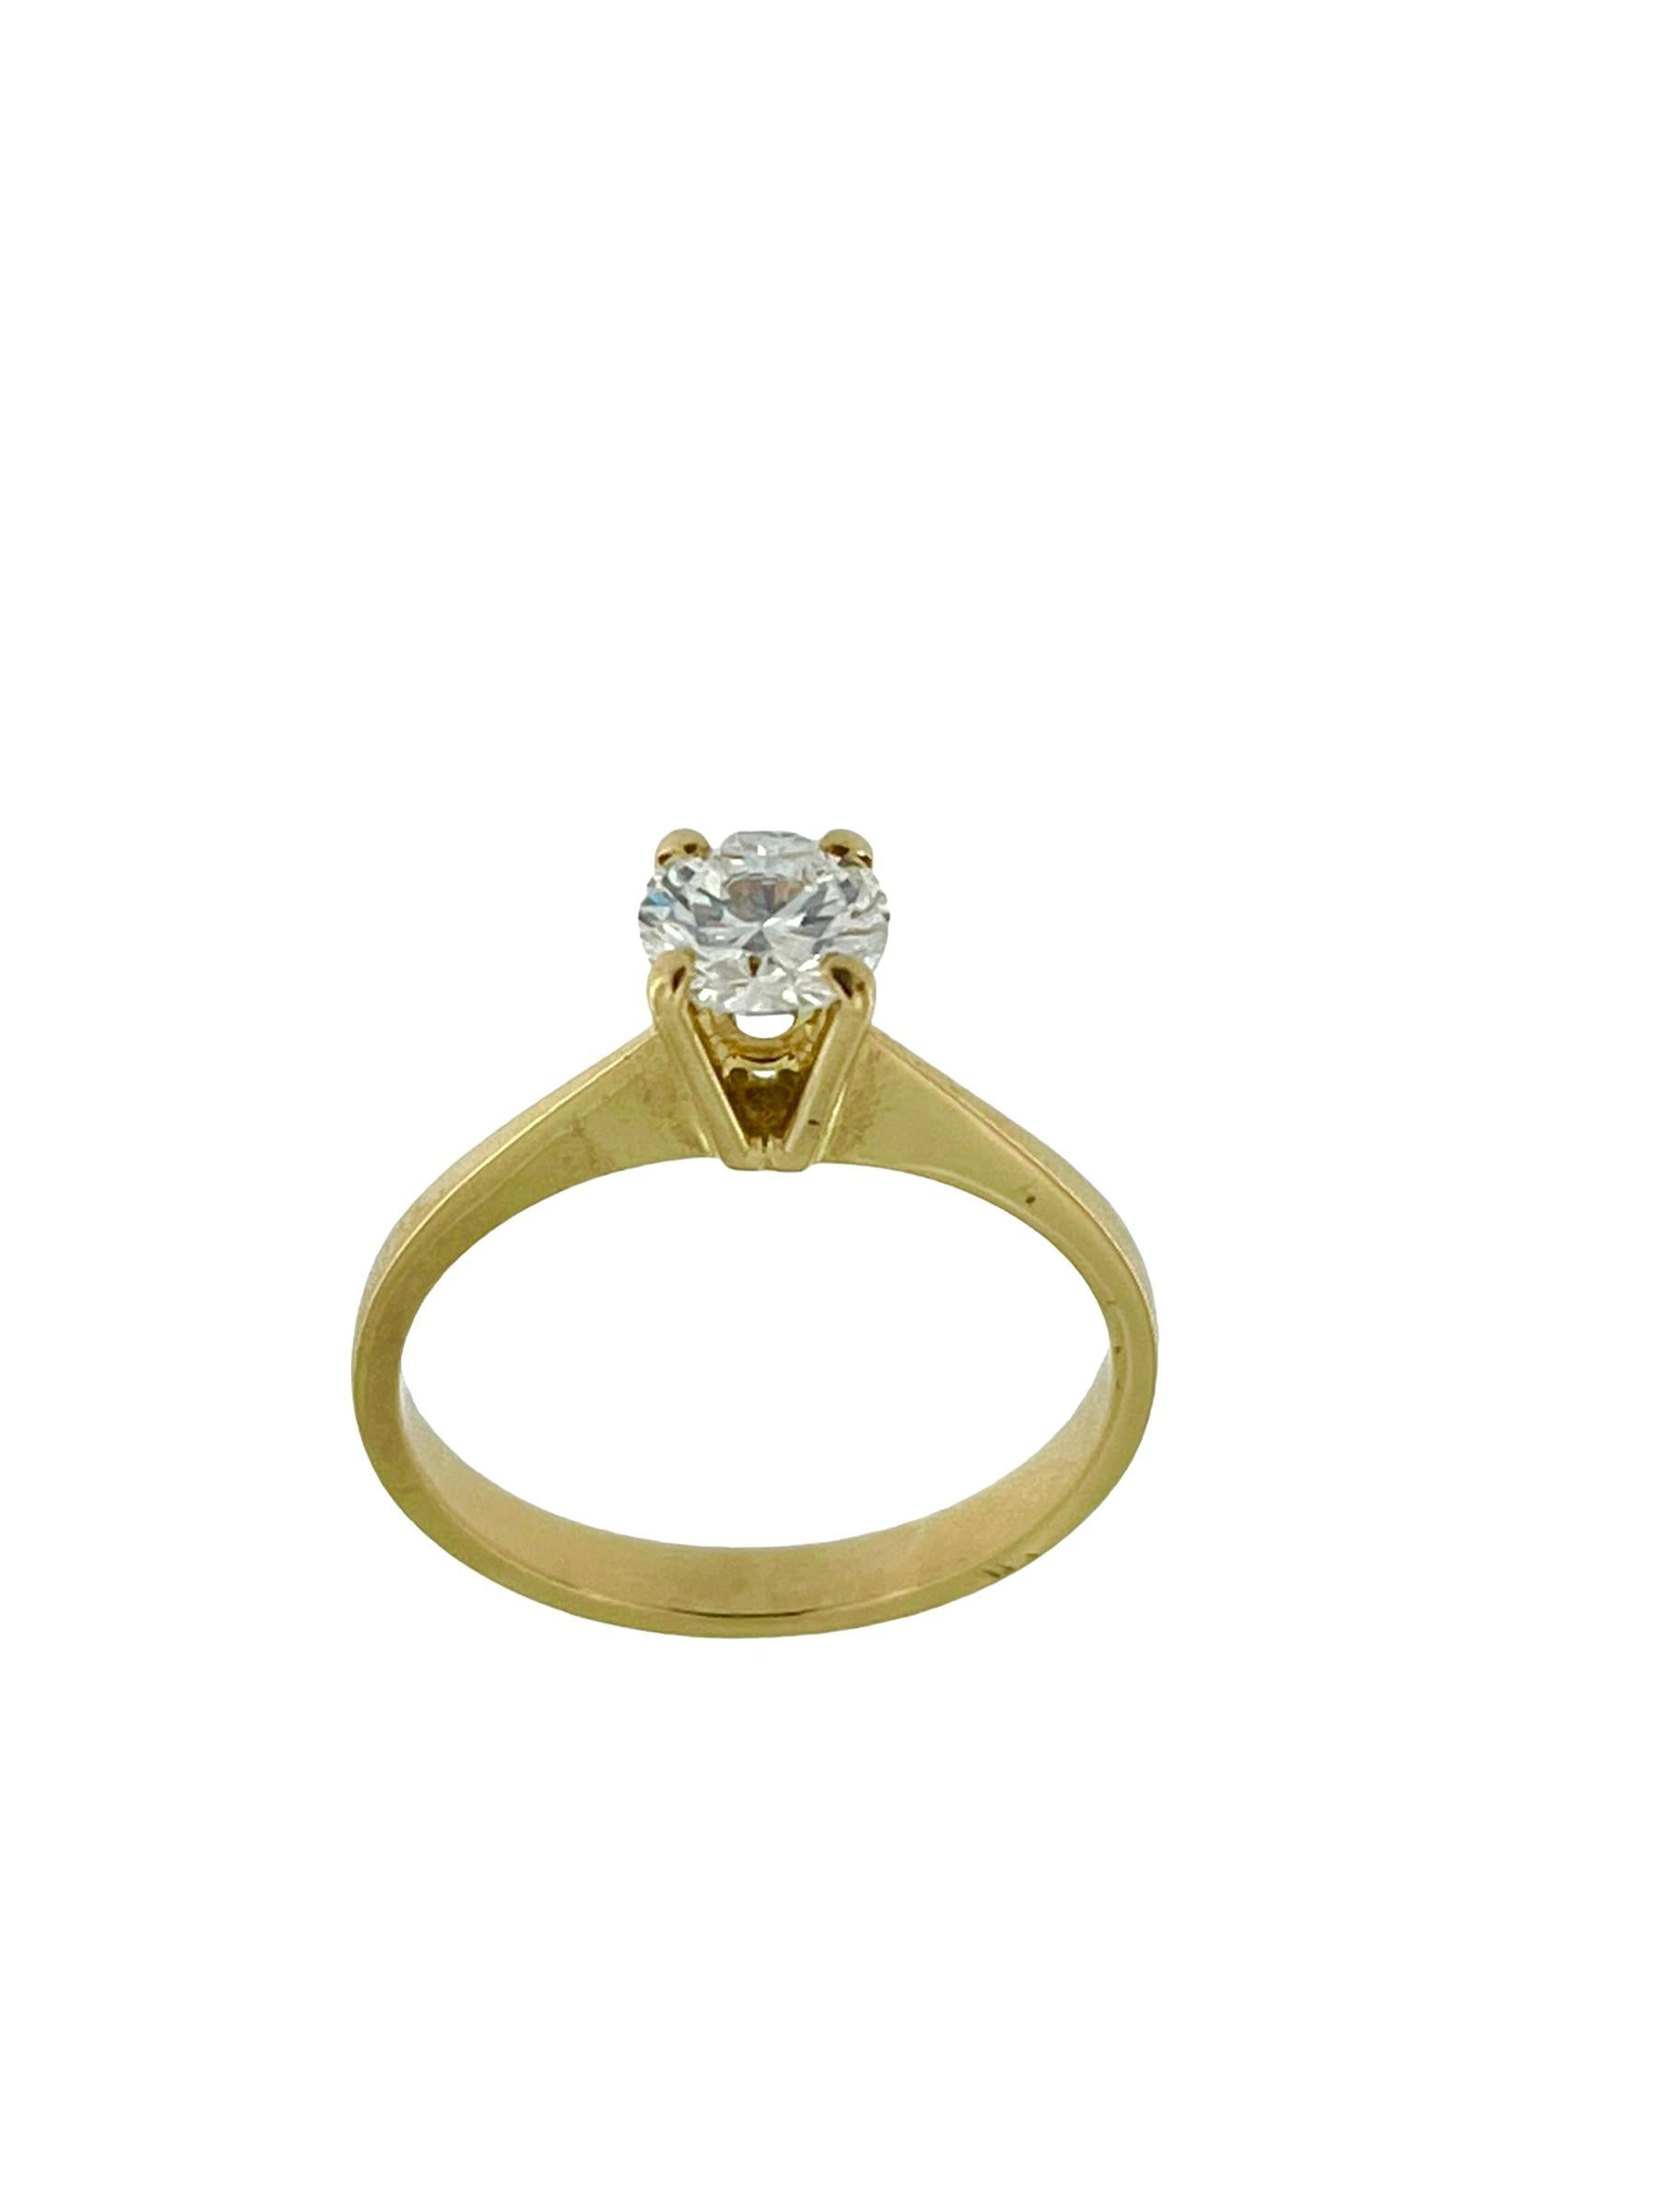 Modern HRD Certified Yellow Gold Solitaire Ring For Sale